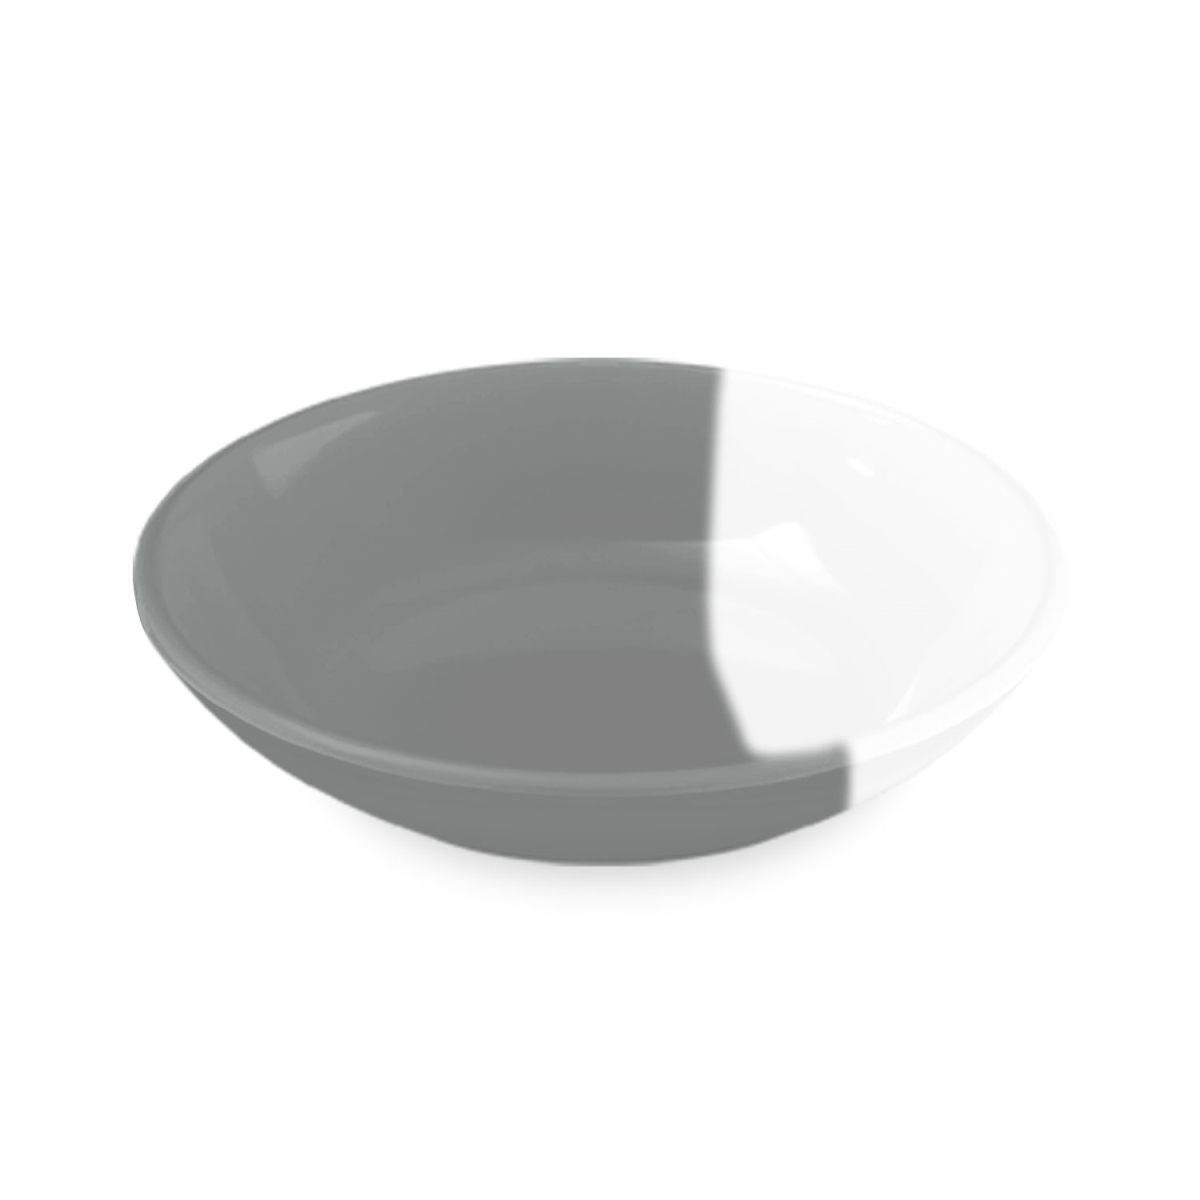 Picture of TarHong PE20772070 5.2 in. Melamine Dual Pet Saucer, Grey - 0.75 Cup - Set of 2